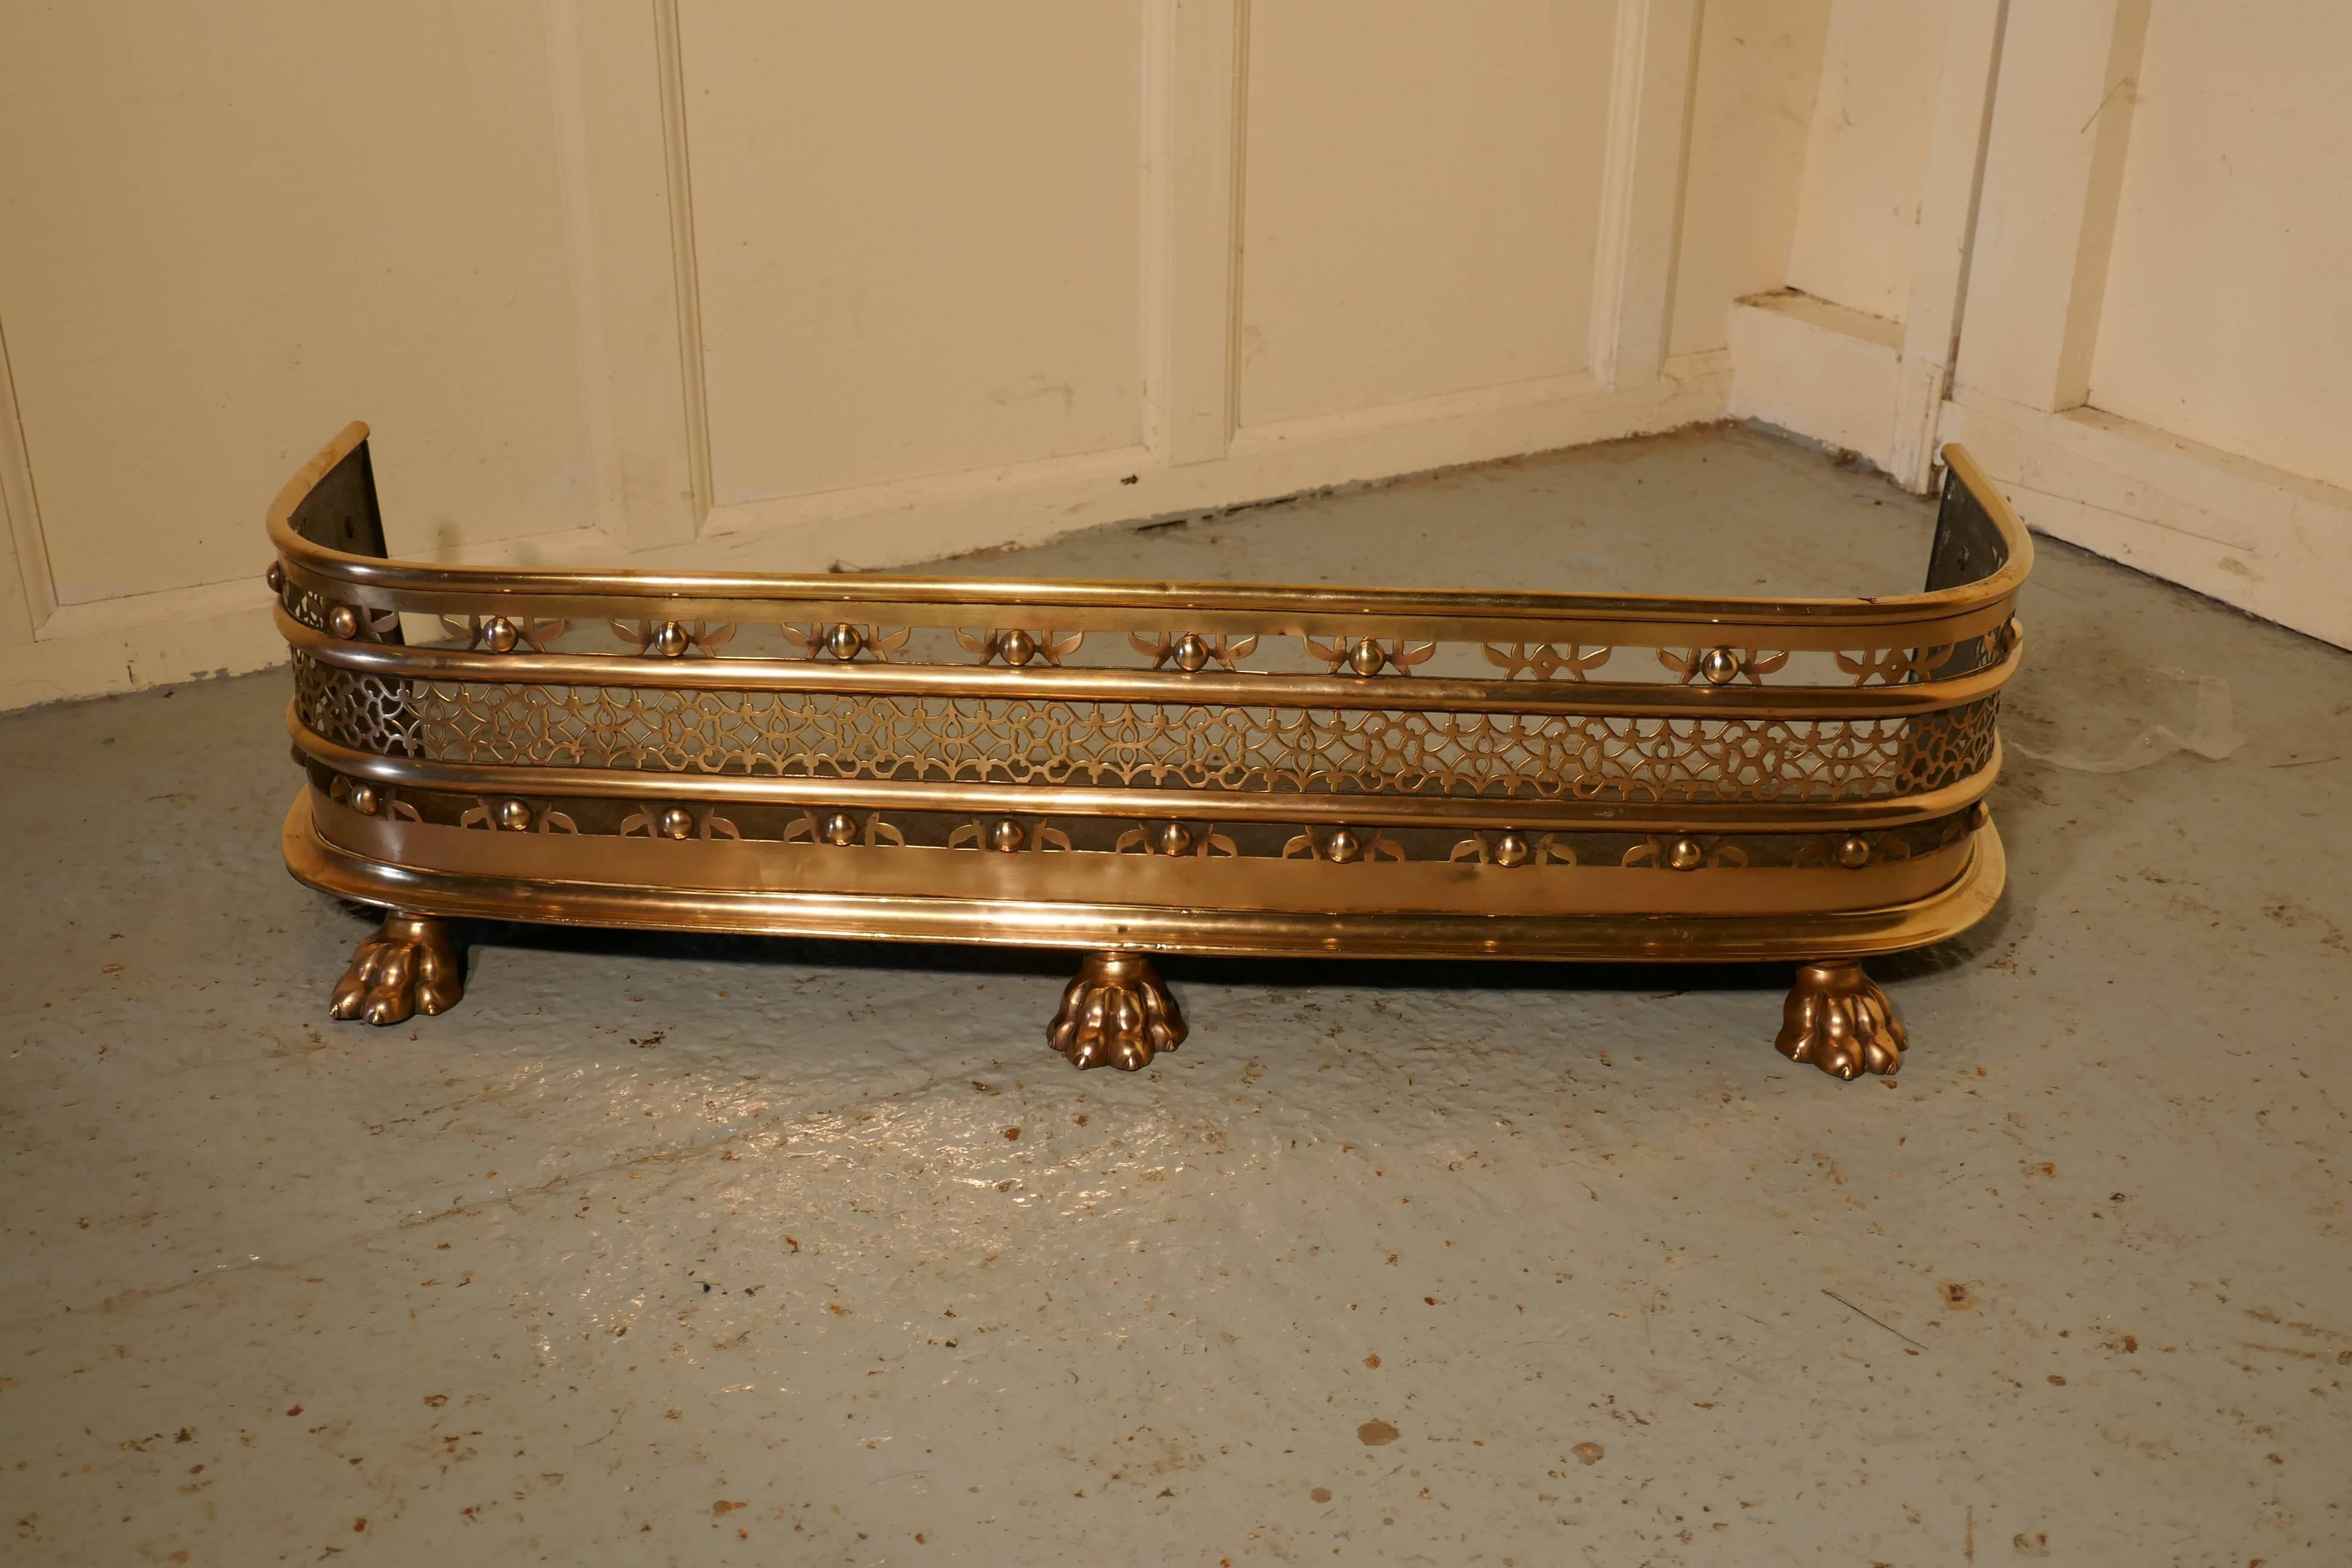 Fine quality Victorian pierced brass fender

This is a Victorian pierced brass fender it has, an elaborate pierced decoration, an iron base and stands on large lions paw feet
The fender is in very good condition it is 11” high, and 36” long and